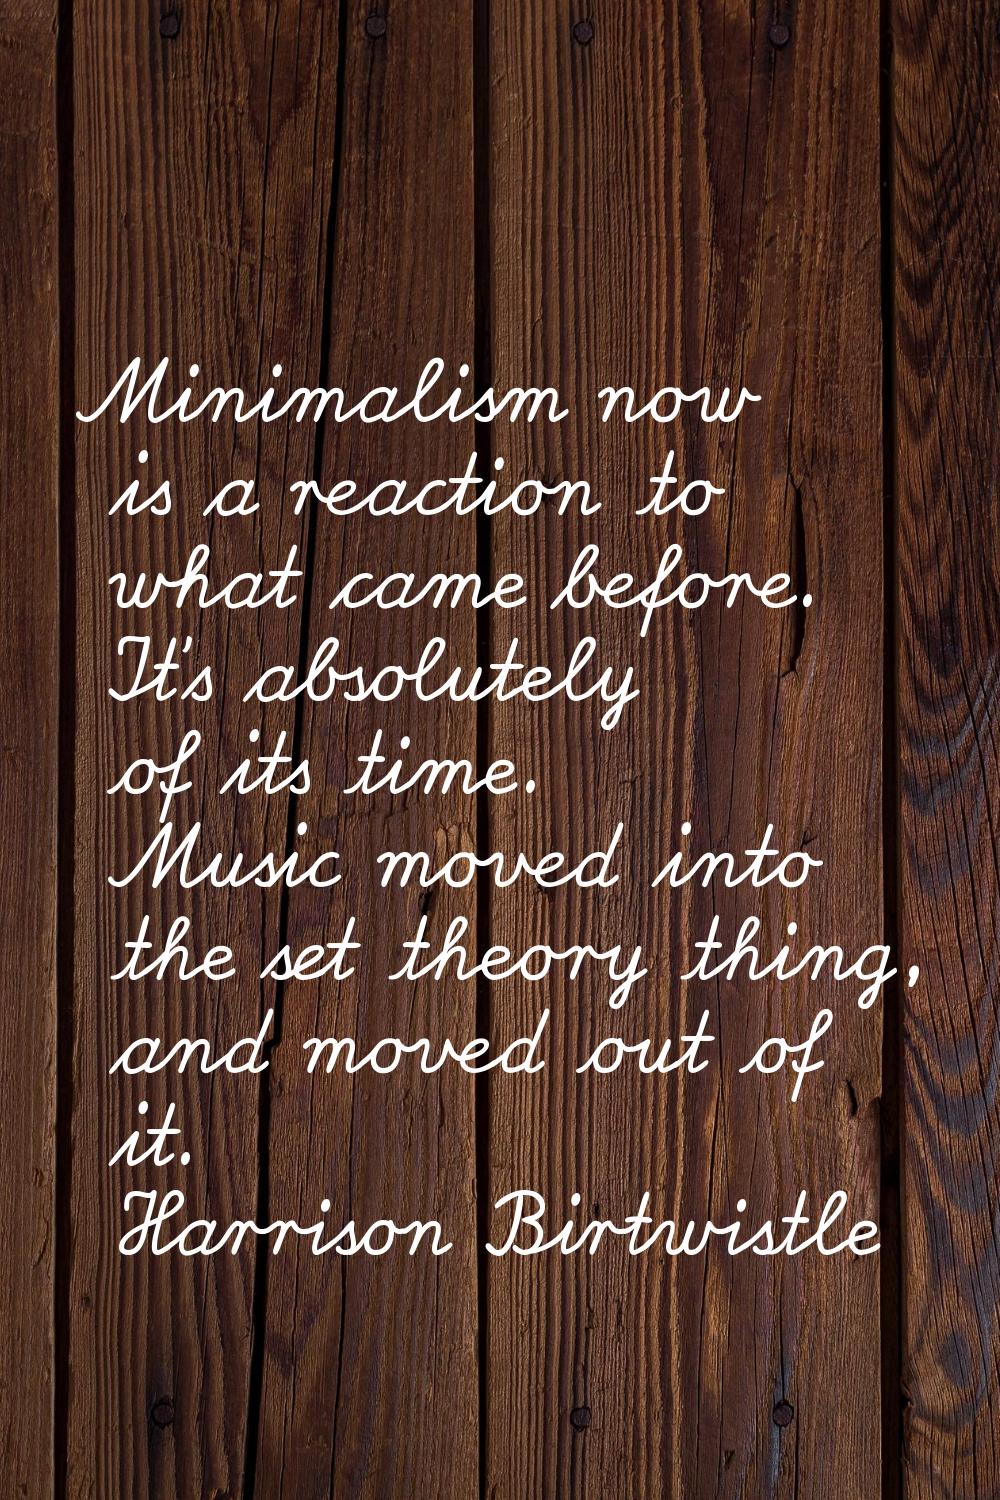 Minimalism now is a reaction to what came before. It's absolutely of its time. Music moved into the